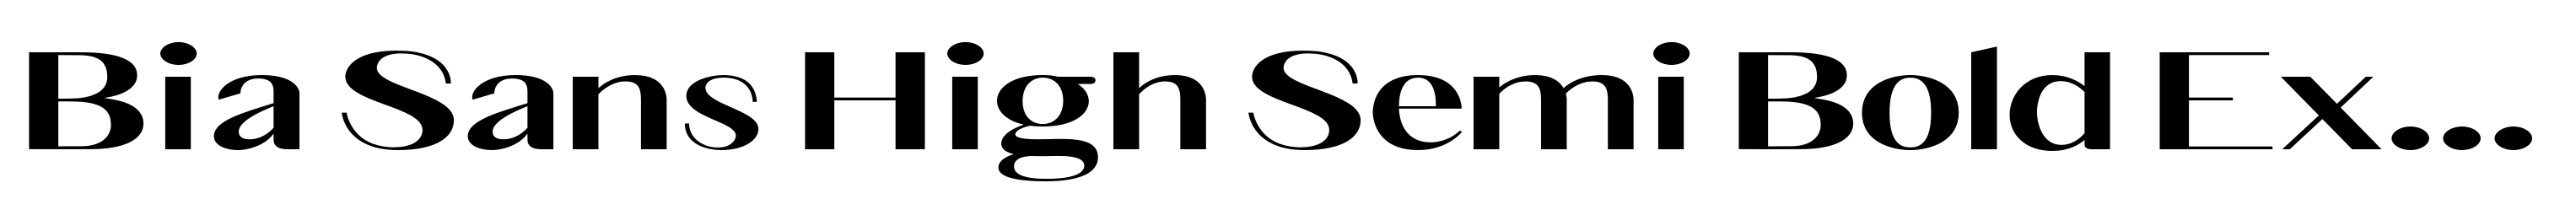 Bia Sans High Semi Bold Expanded